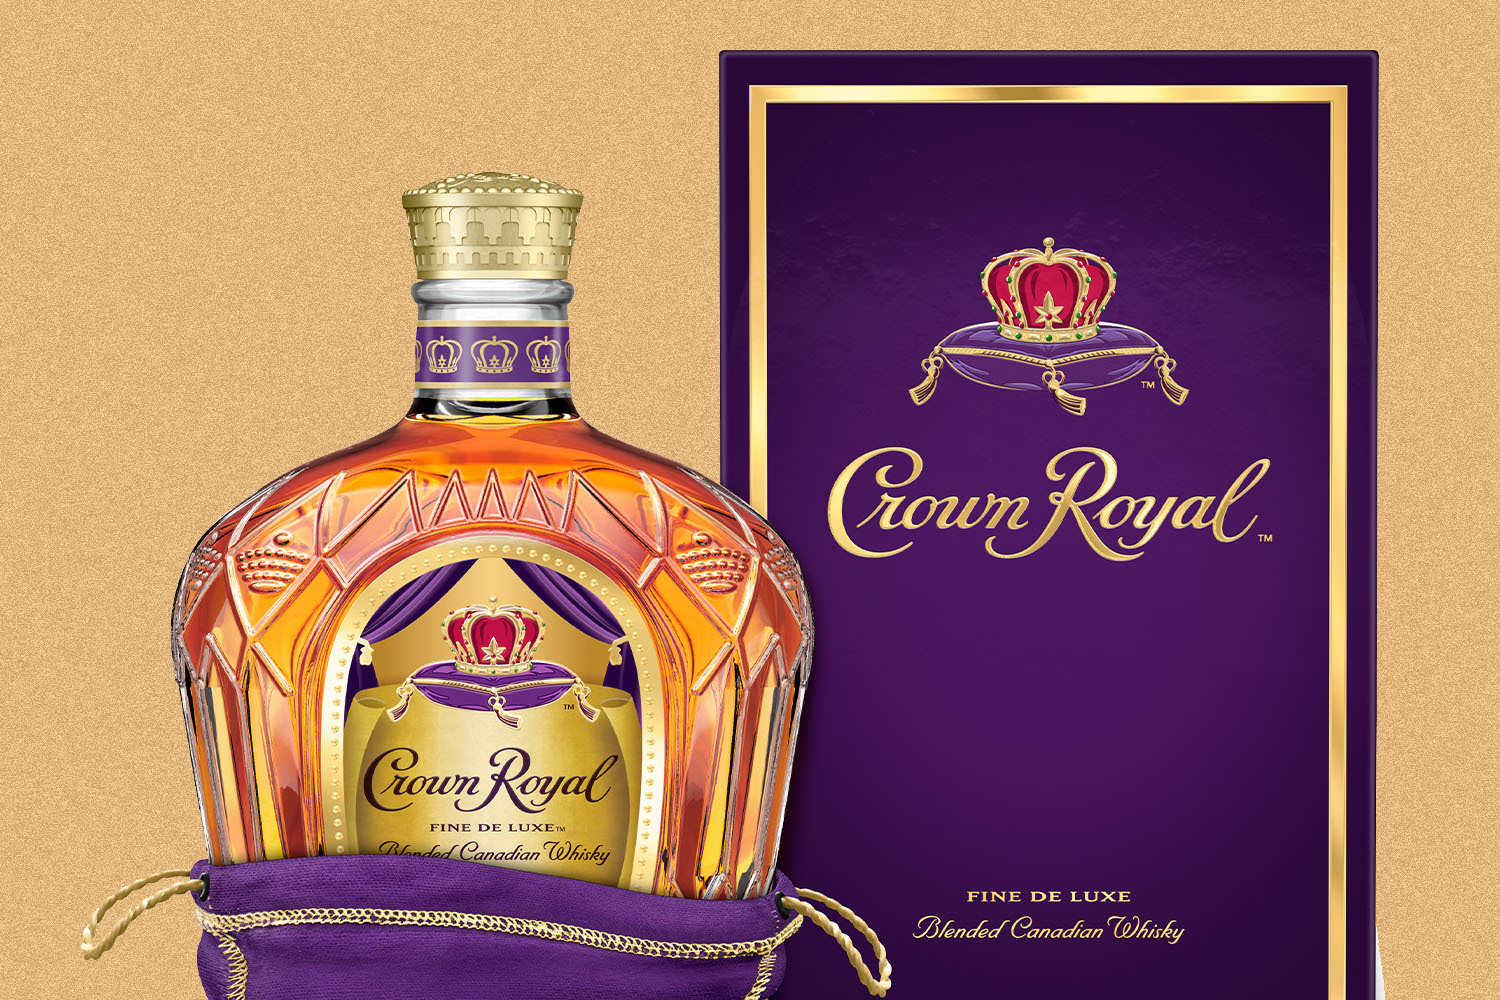 Crown Royal bottle and box